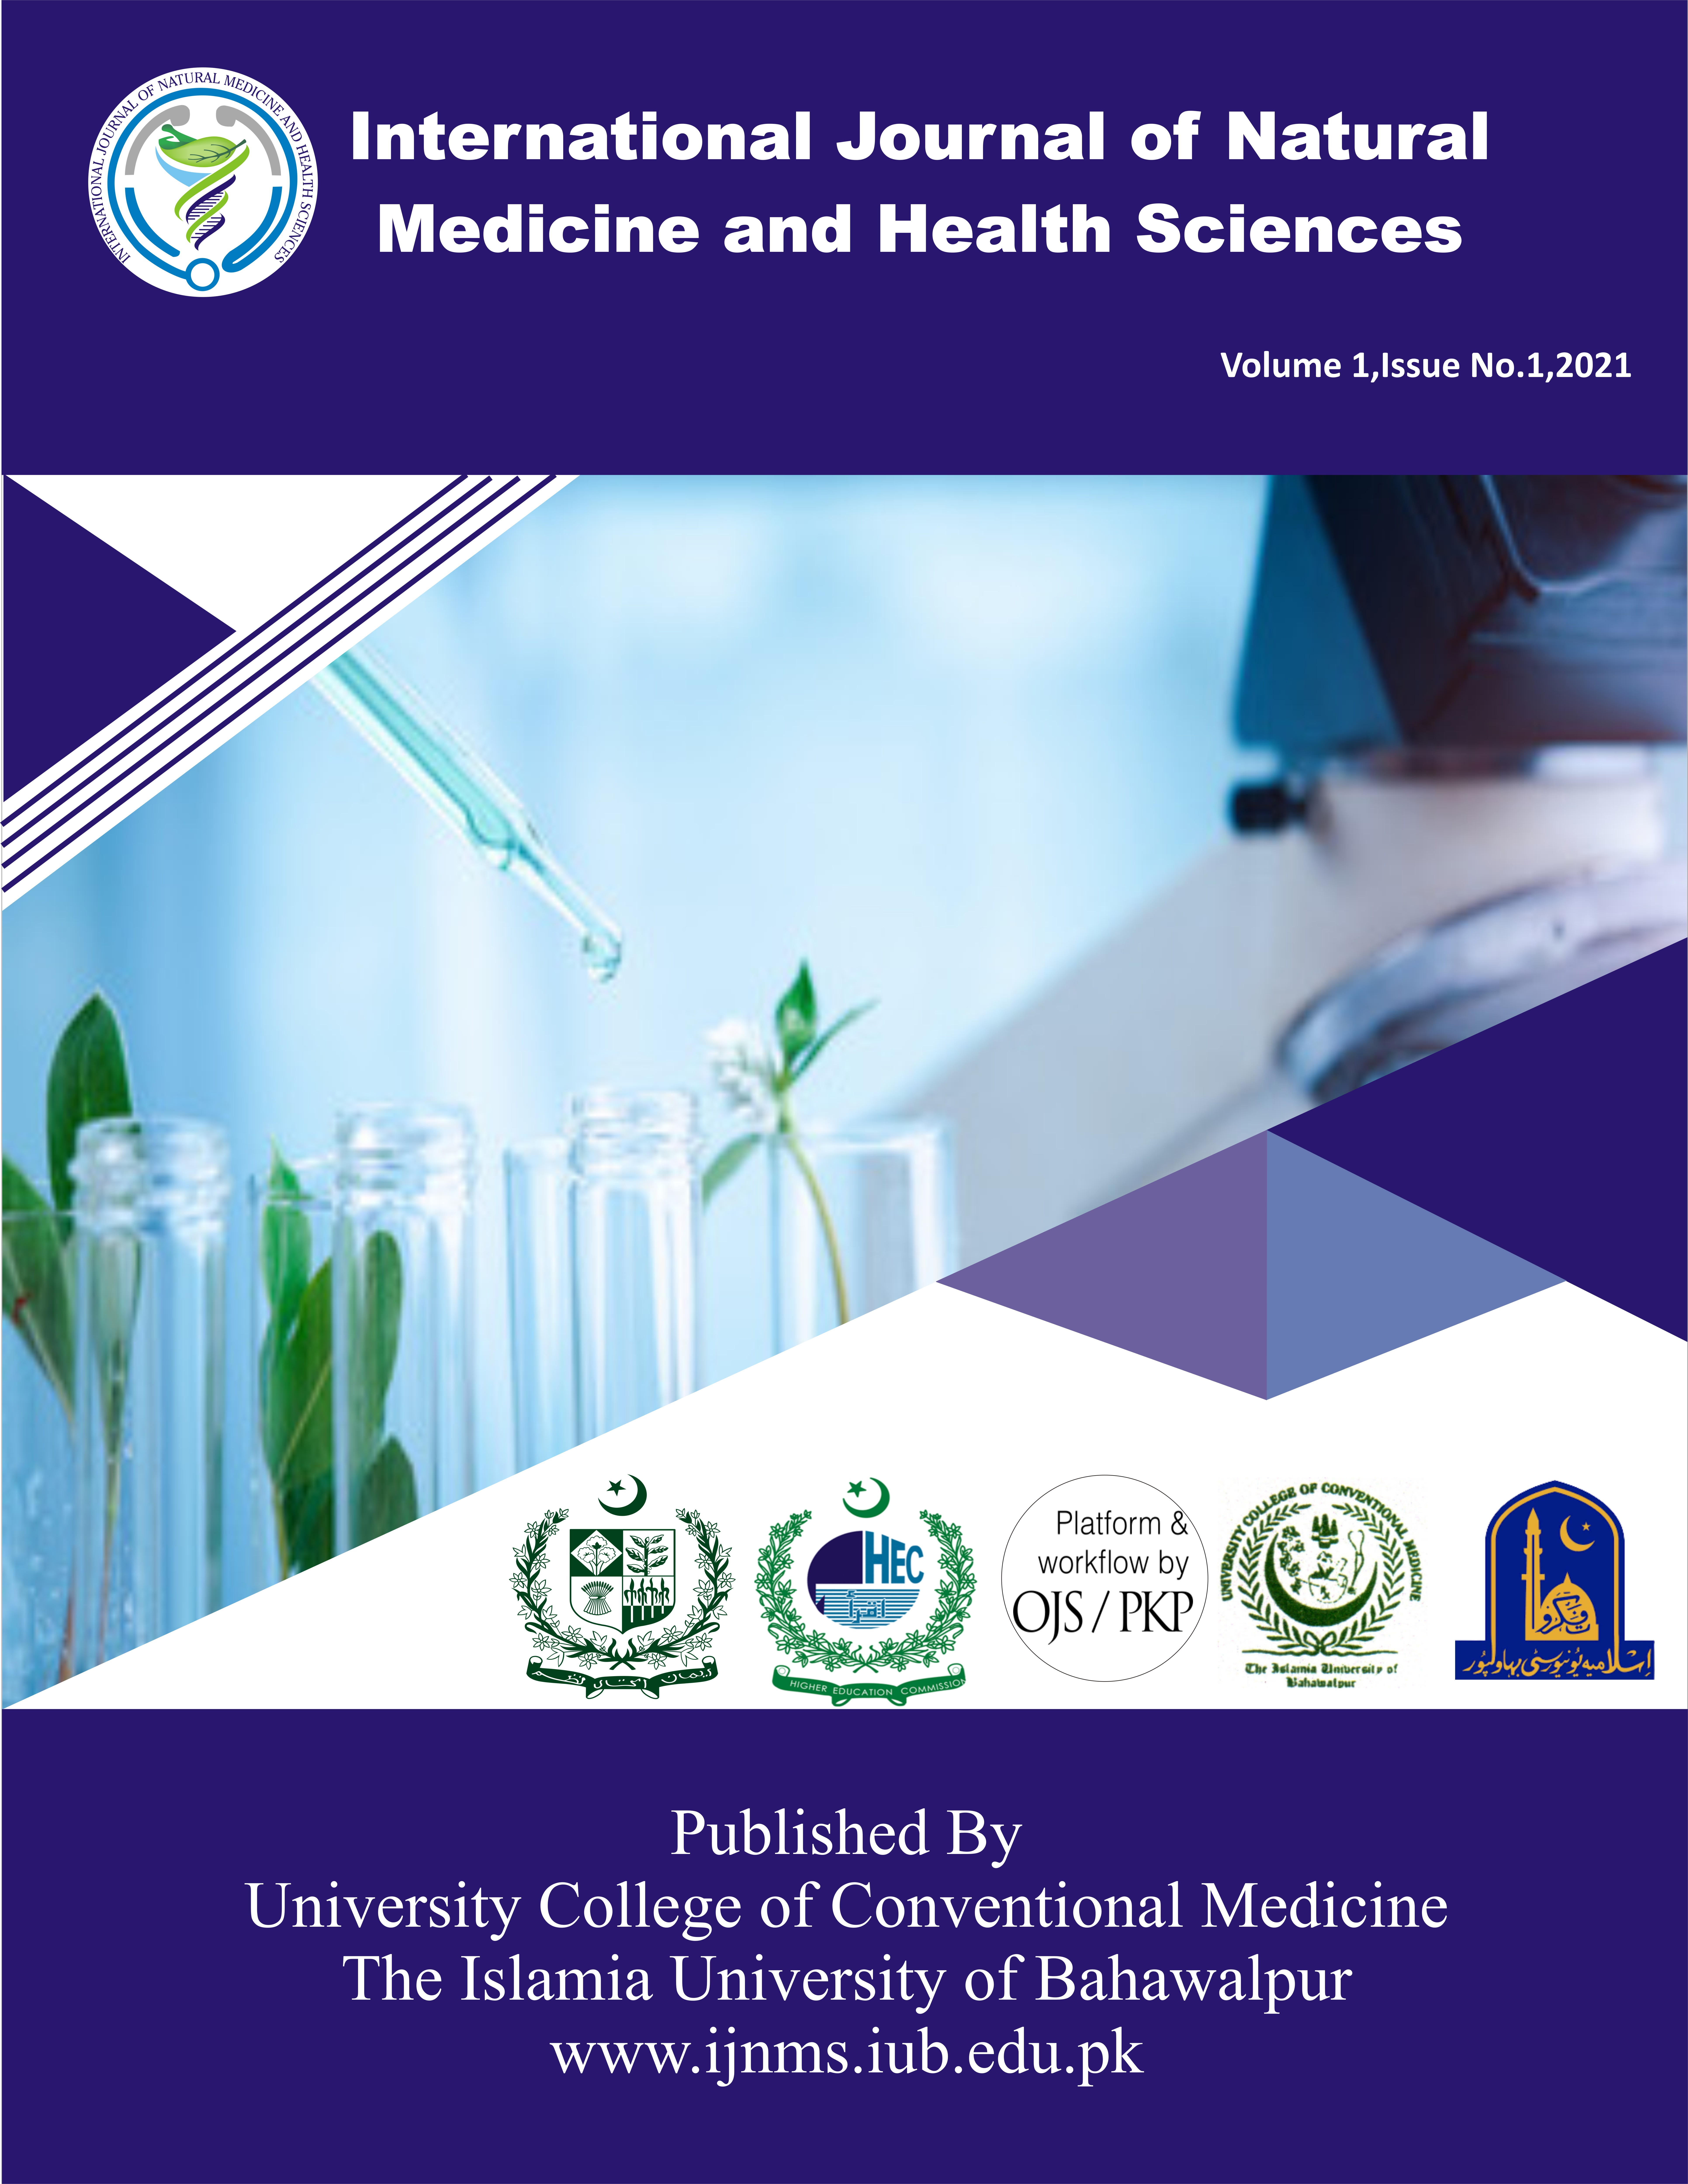 					View Vol. 1 No. 1 (2021): International Journal of Natural Medicine and Health Sciences
				